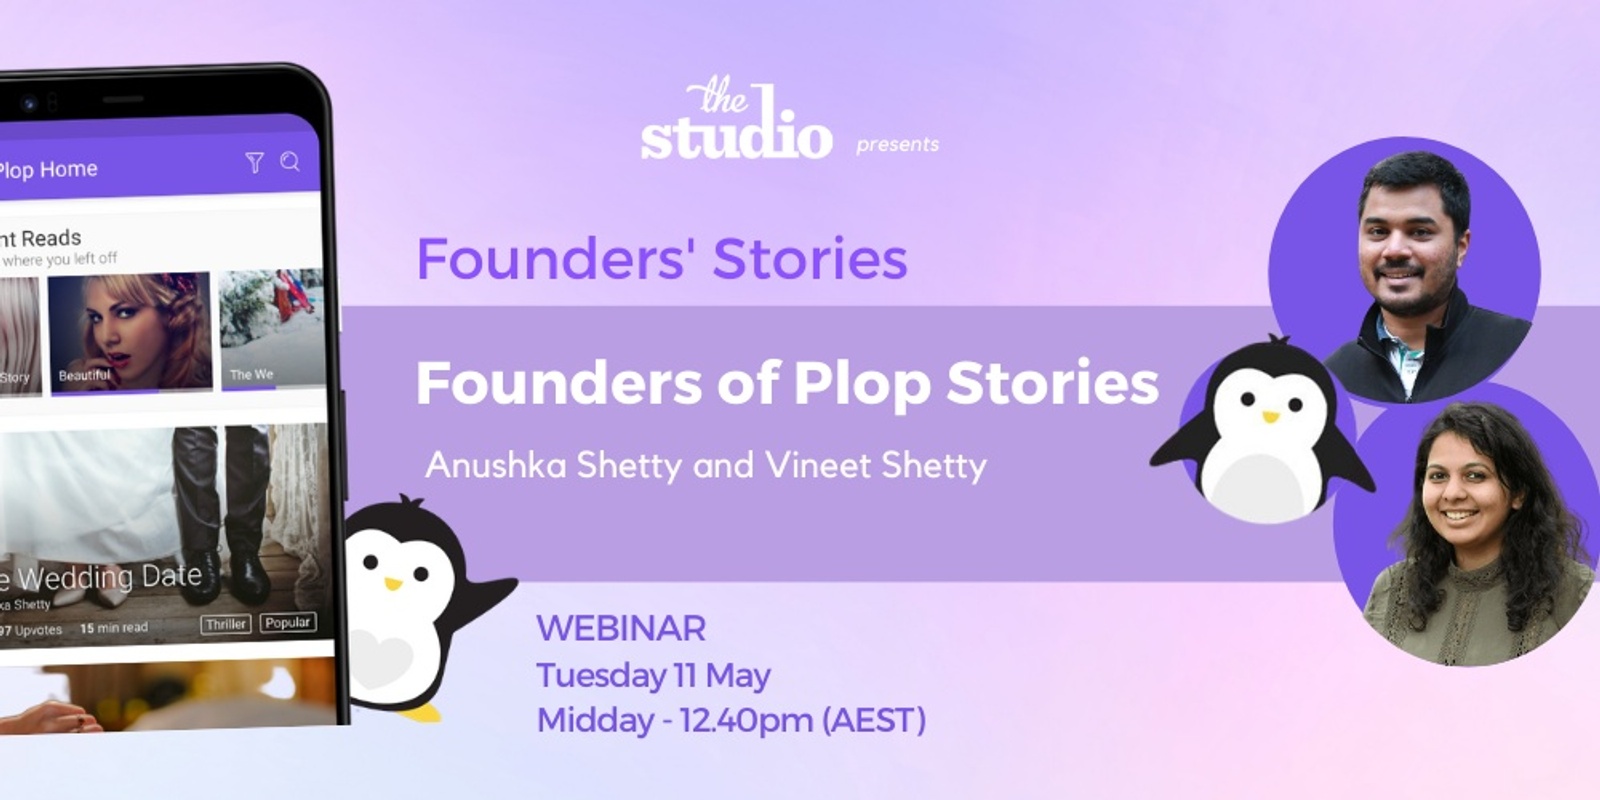 Banner image for Founders' Stories: Anushka Shetty and Vineet Shetty, Founders of Plop Stories